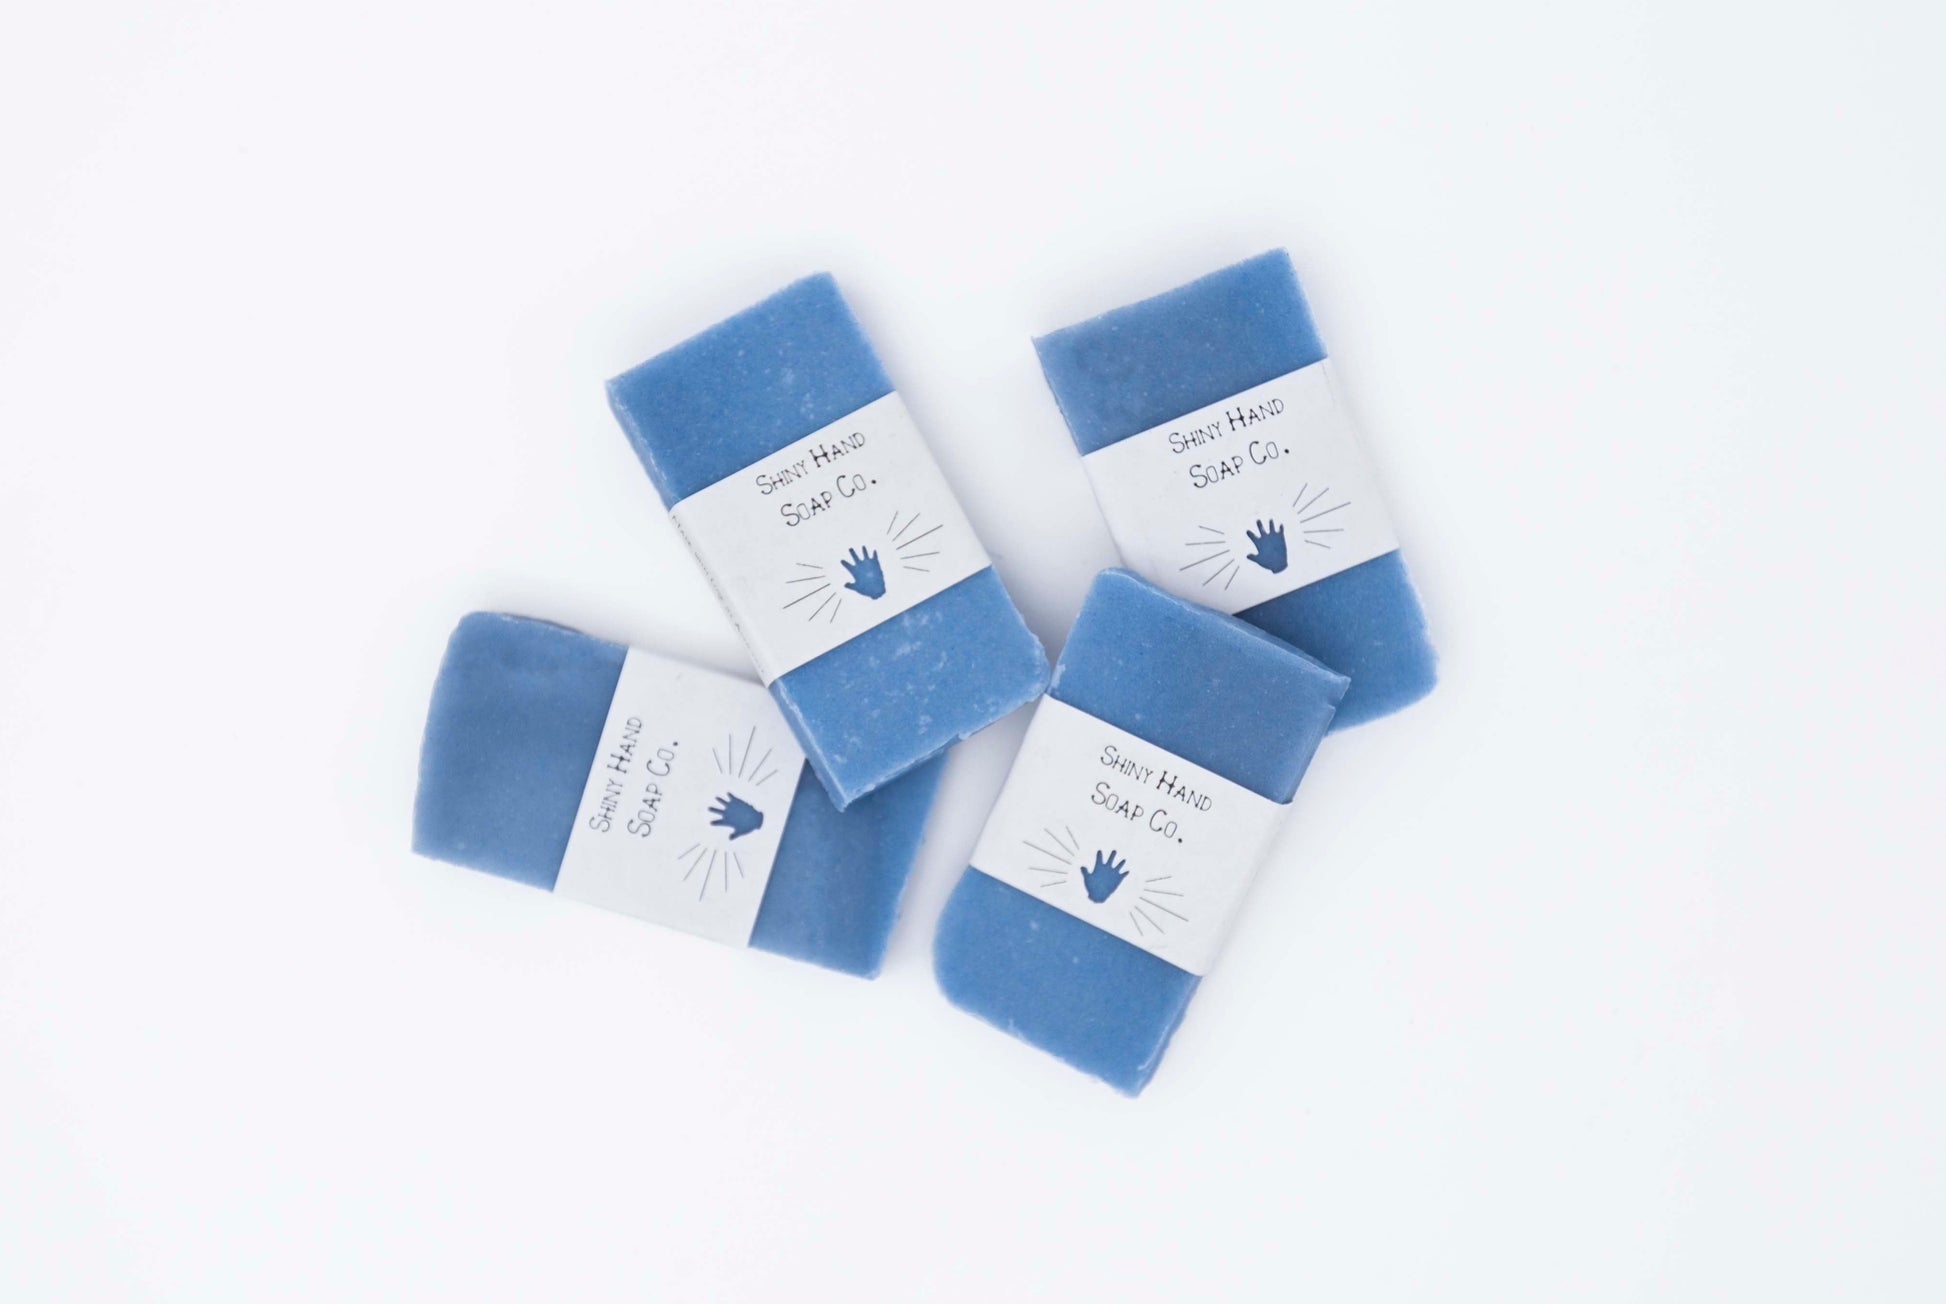 Four bright royal blue miniature bars of eucalyptus lavender bar soap sit on a clean white background with white paper wrappers that have a hand shape cut out of them.